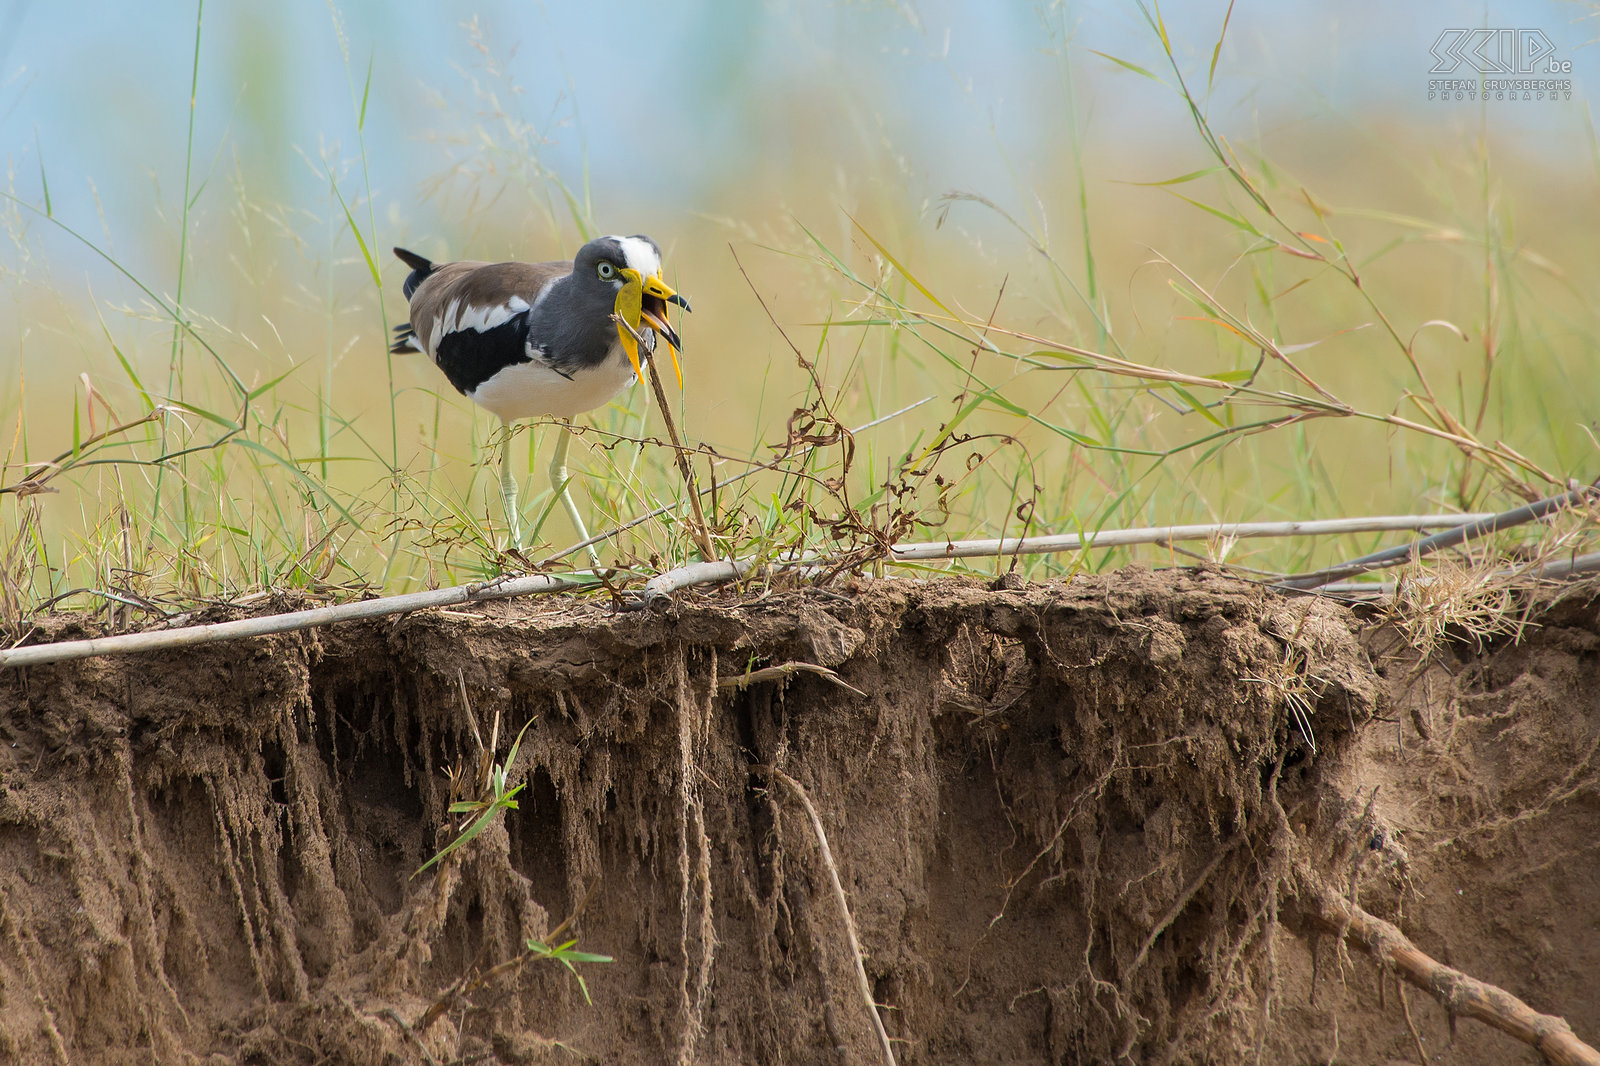 Lower Zambezi - White-crowned plover A white-crowned lapwing (Vanellus albiceps) has distinctive yellow wattles and can make a lot of noise. Stefan Cruysberghs